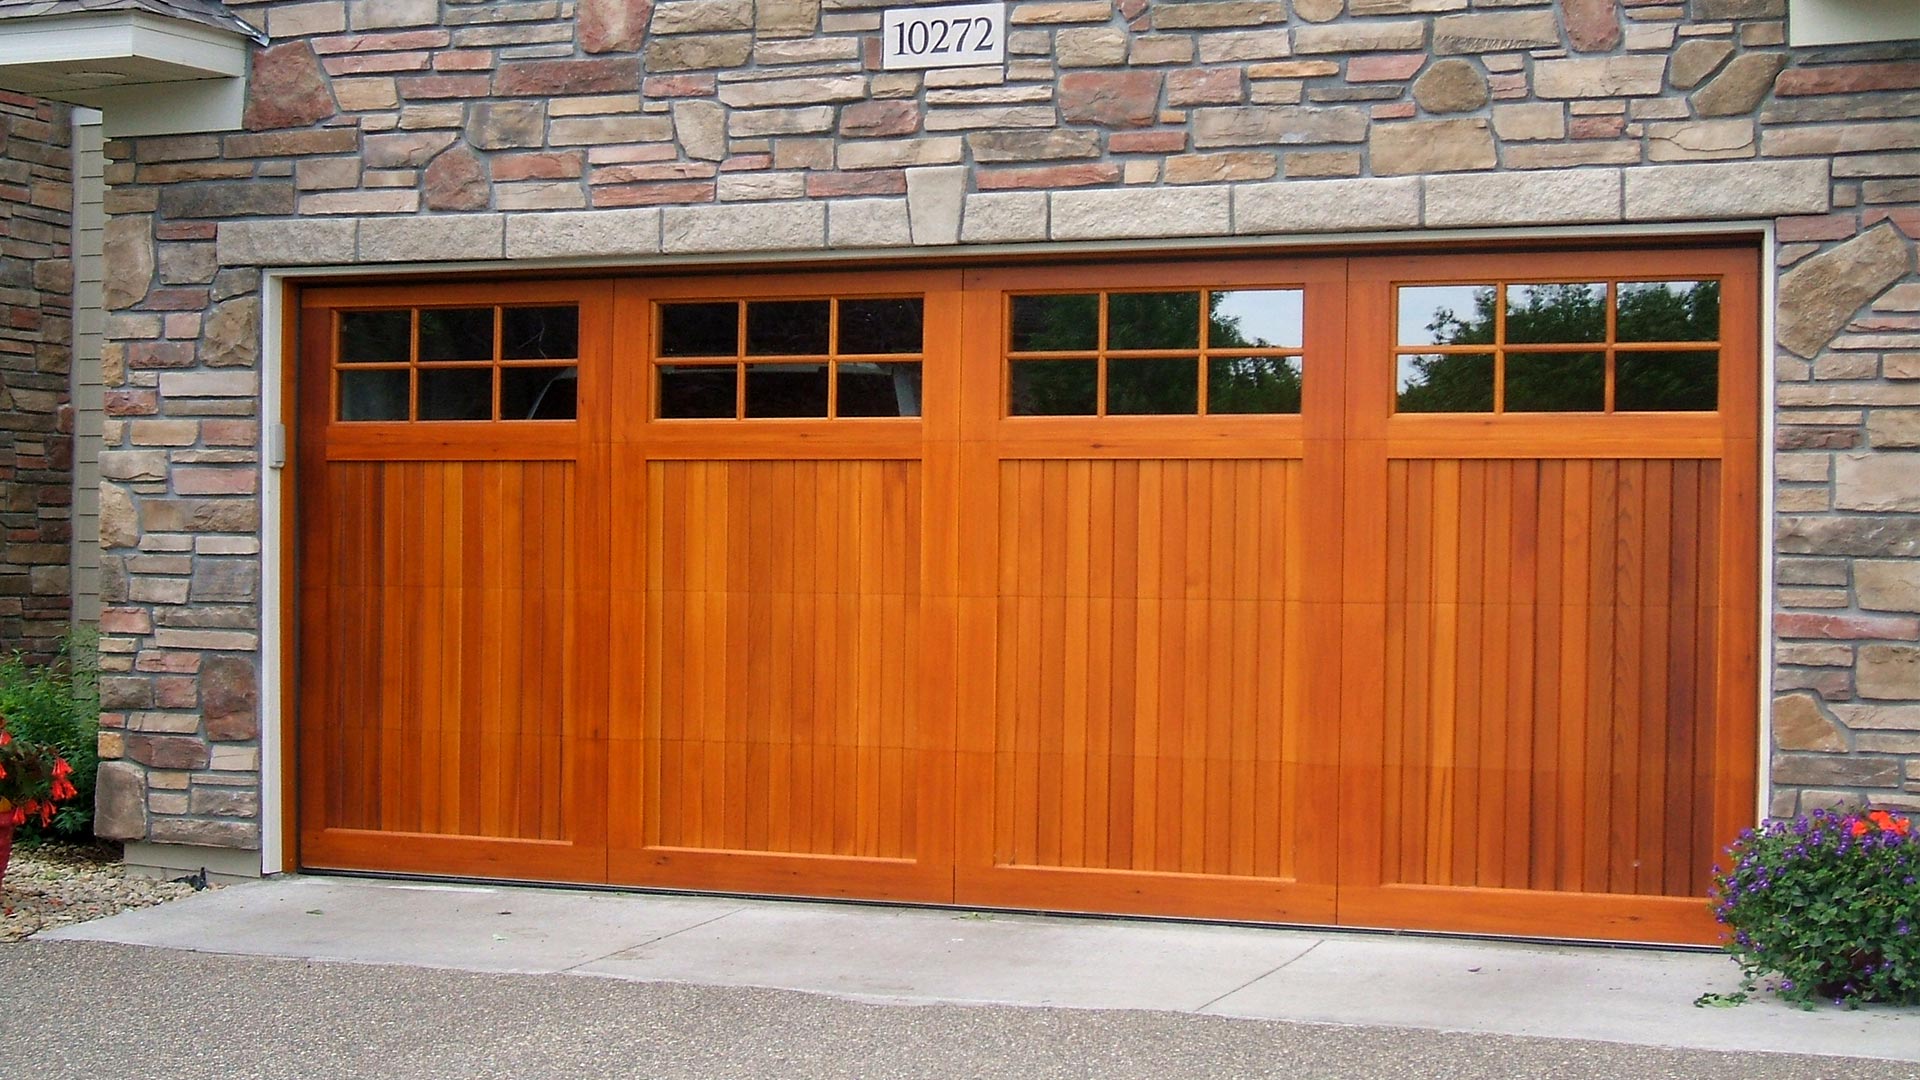 Solid wood, residential double car garage door with paneled glass on the top quarter of the door.